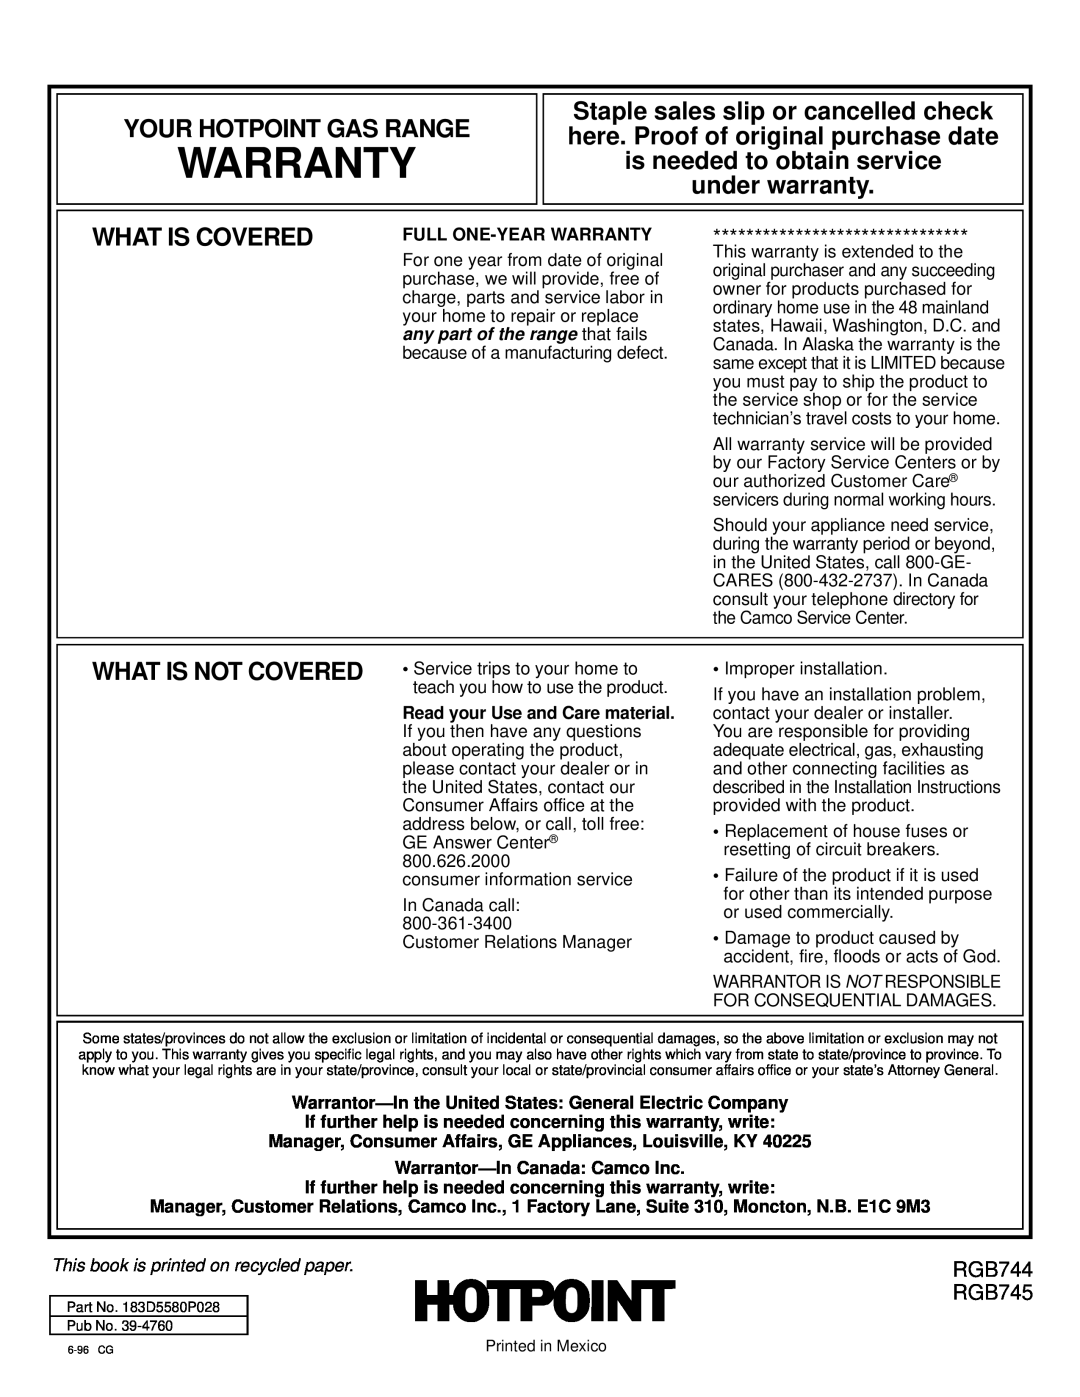 Hotpoint RGB744 Warranty, Your Hotpoint Gas Range, under warranty, What Is Covered, What Is Not Covered, RGB745 